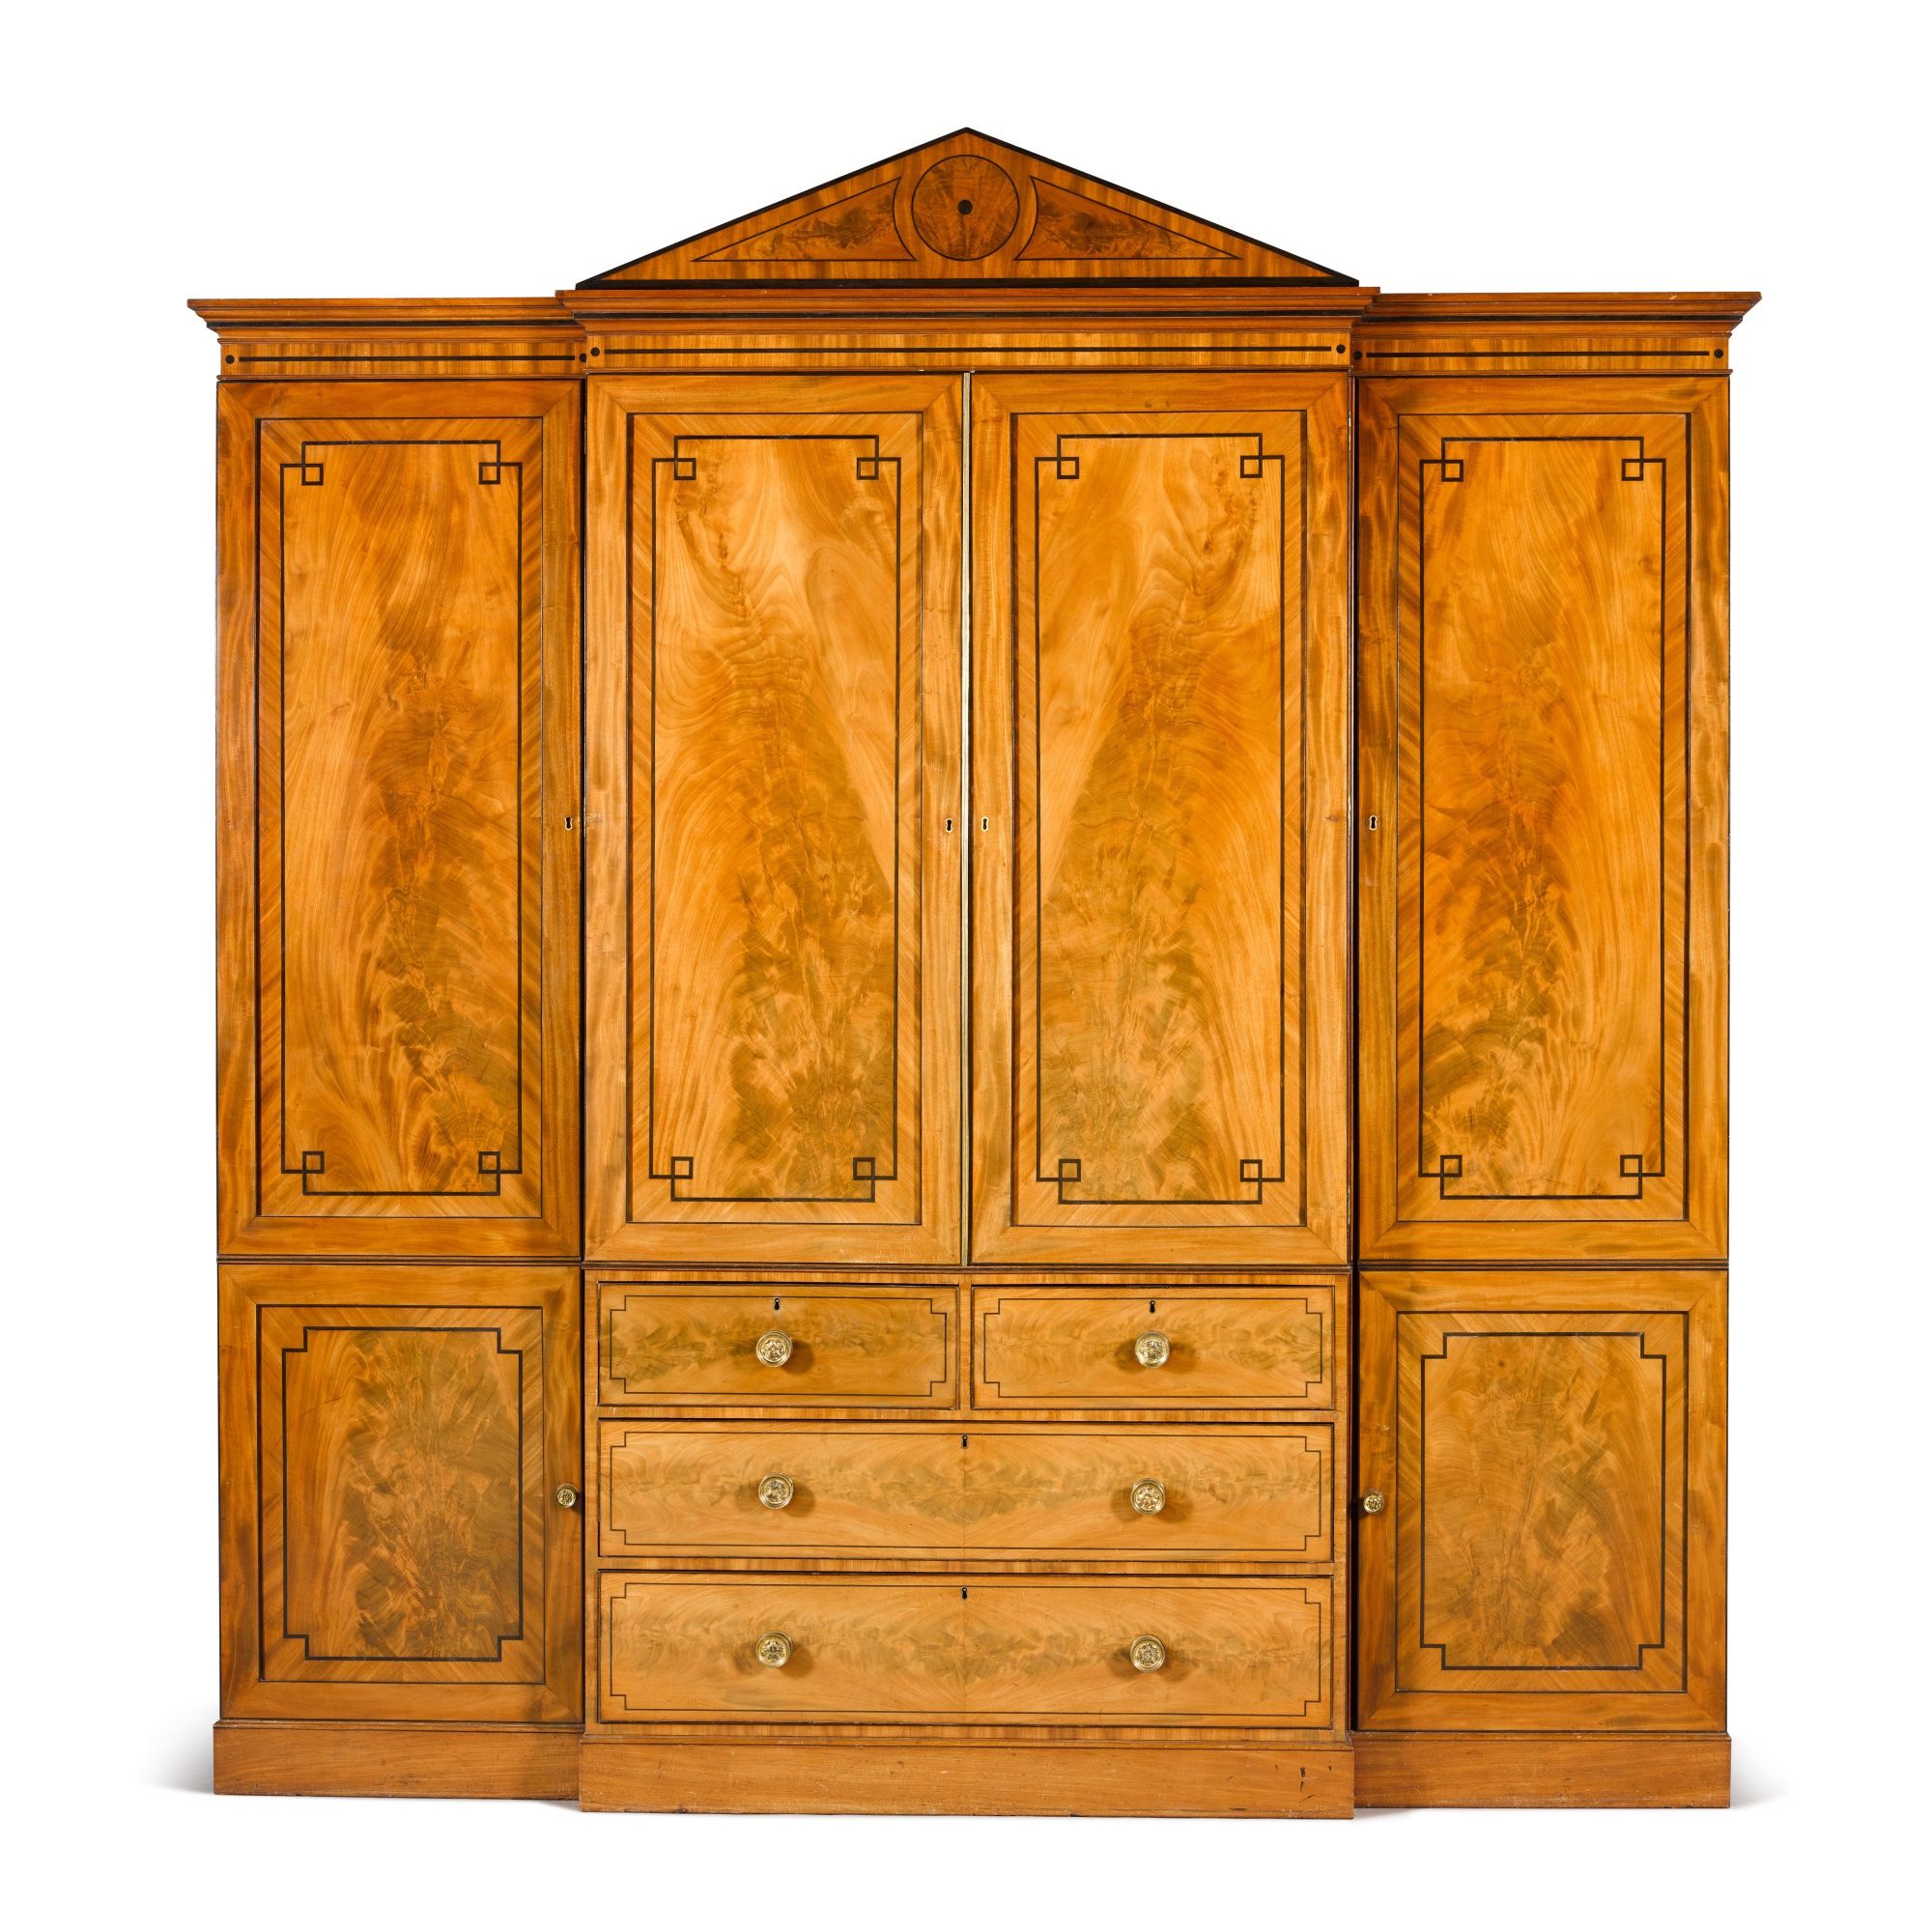 A Regency Mahogany And Ebony Strung Breakfront Wardrobe, Early 19th Century  | Kenneth Neame: Cadogan Square And Mayfair | 2022 | Sotheby's Inside Georgian Breakfront Wardrobes (View 17 of 20)